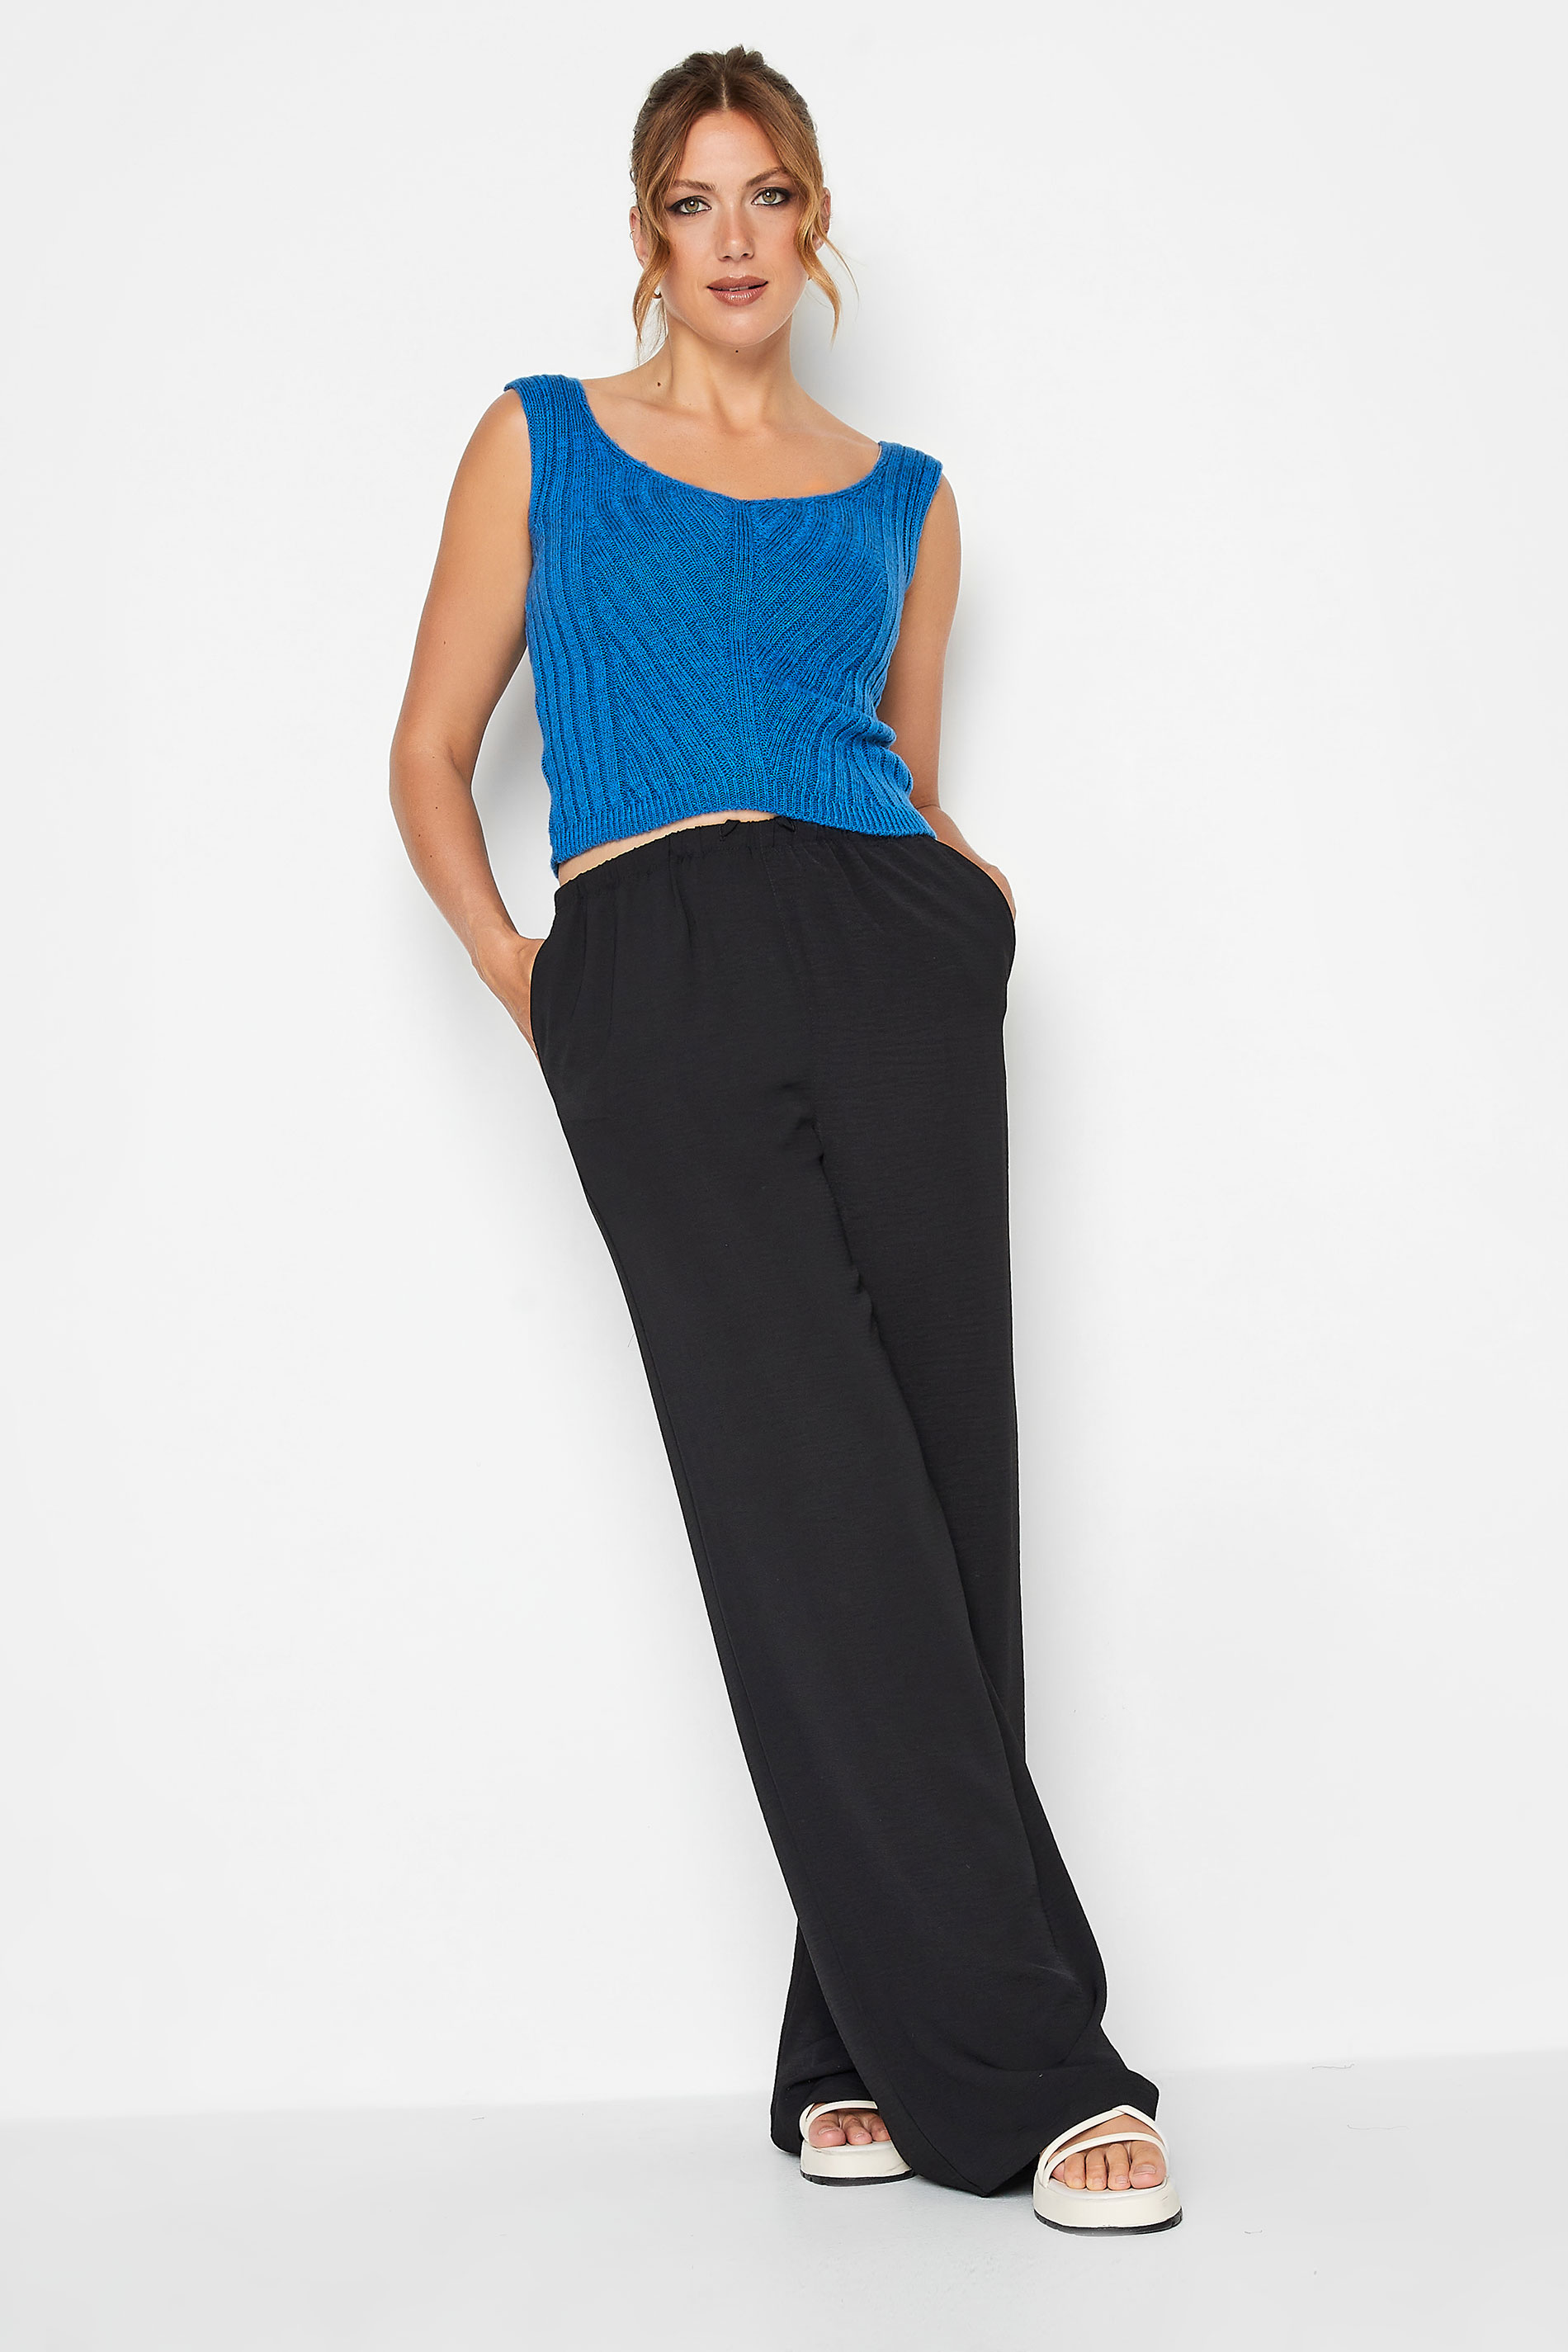 LTS Tall Women's Blue V-Neck Knitted Vest Top | Long Tall Sally 2